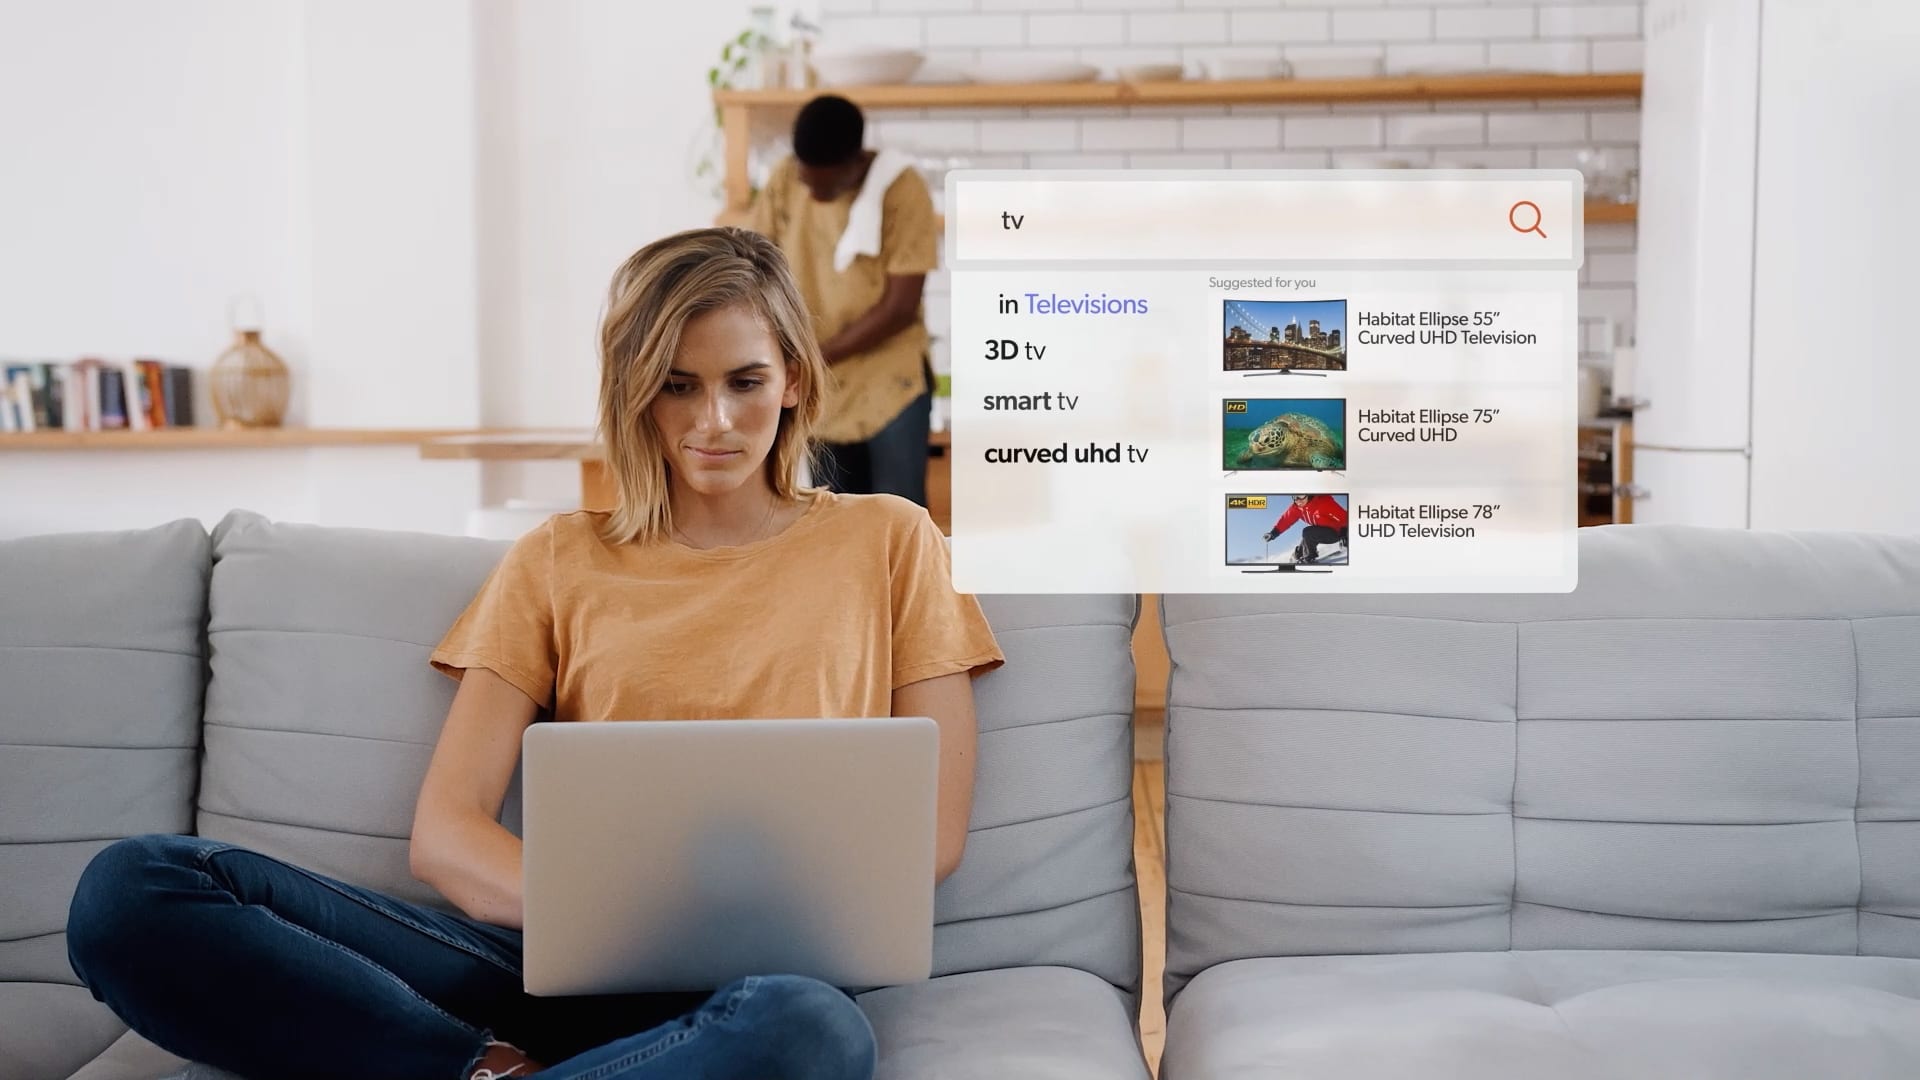 A woman sitting on a couch gets suggestions for TVs from a search bar.